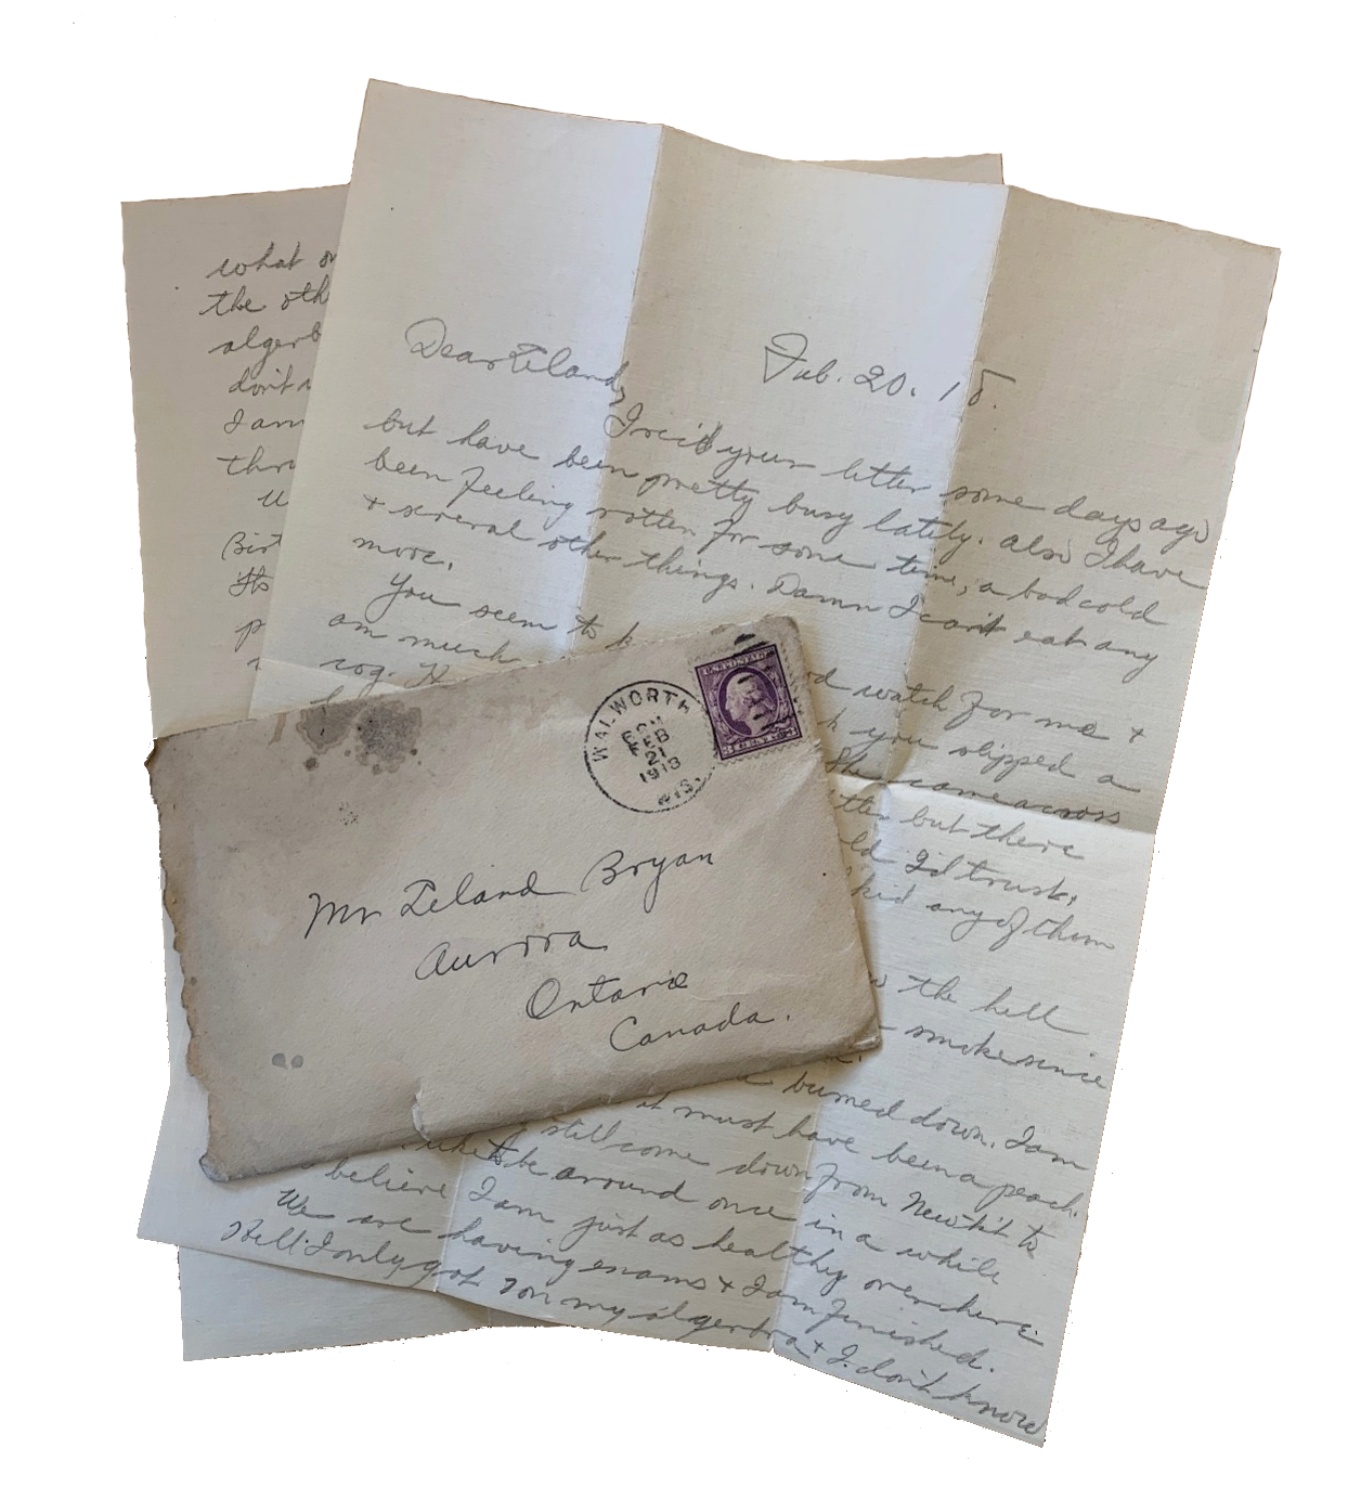 Two-page handwritten letter and envelope dating to 1913.